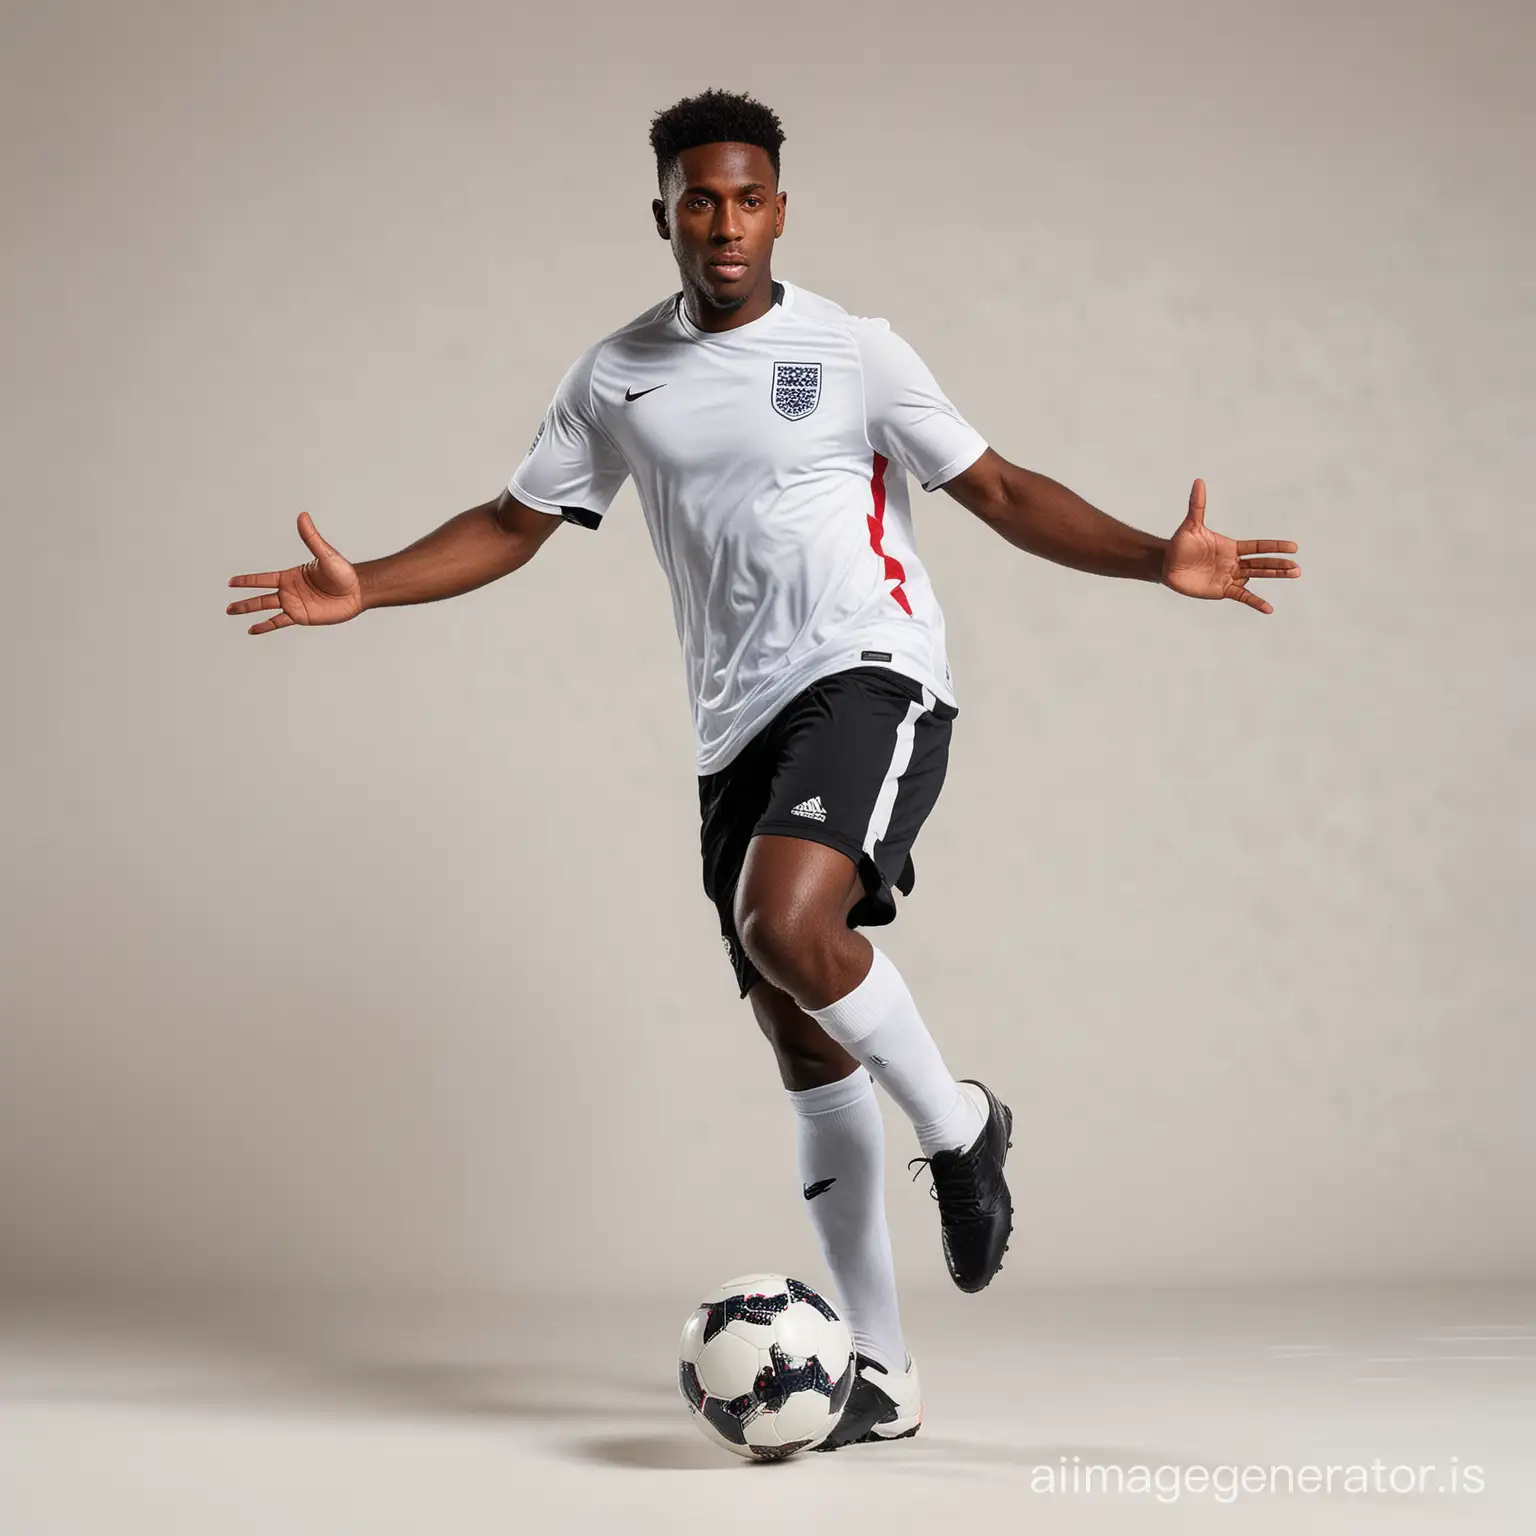 Dynamic-Black-and-White-England-Soccer-Player-on-Translucent-Background